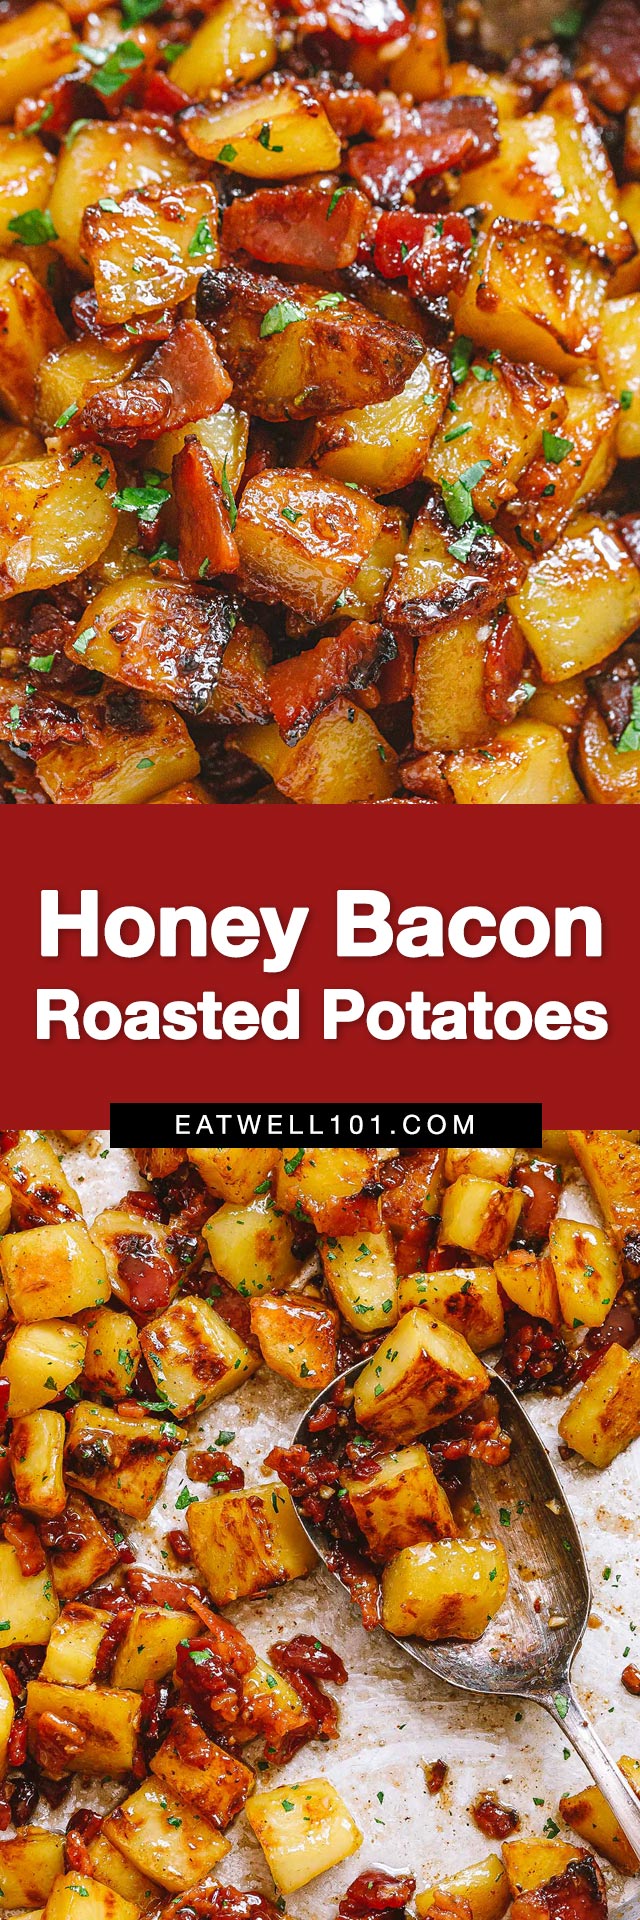 Honey Bacon Roasted Potatoes Recipe - #roasted #potatoes #recipe #eatwell101 - Roasted potatoes are glazed with a delicious honey bacon sauce. This is the best roasted potatoes recipe to serve with your favorite steak, pork chops, or roast chicken!